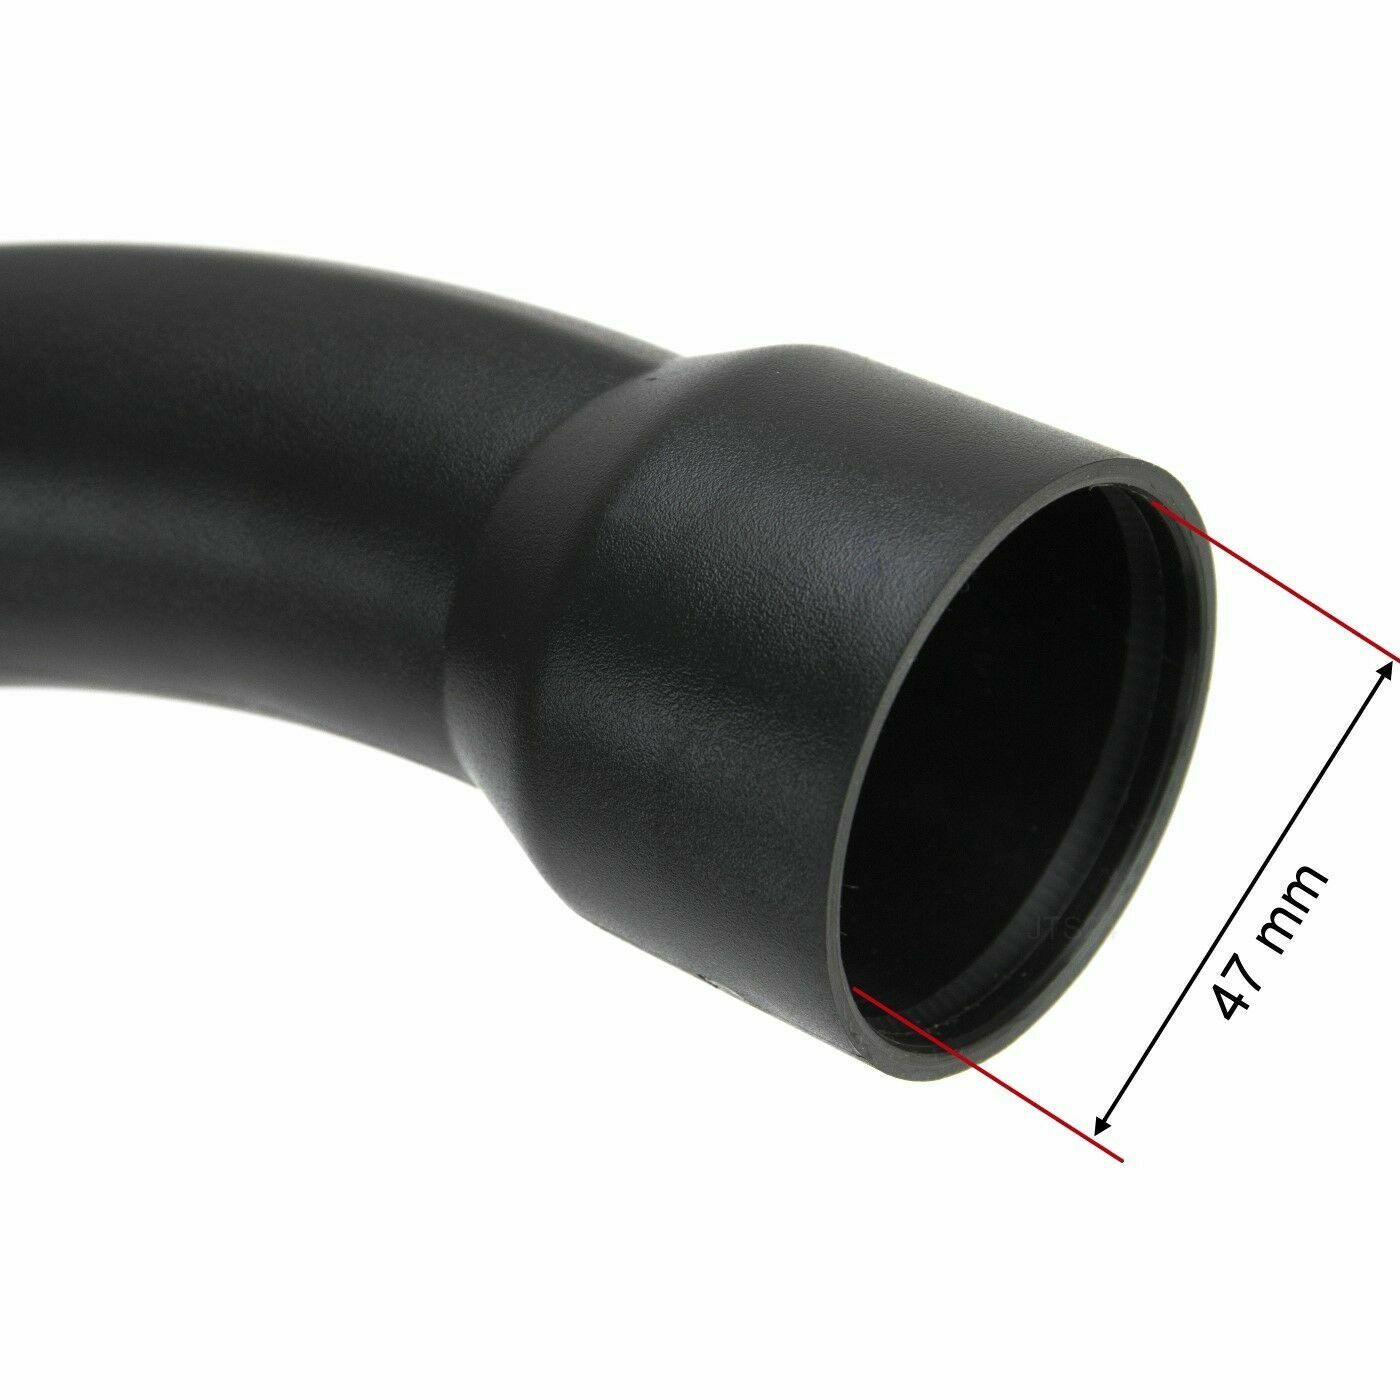 Hose Bent End Curved Handle For Miele Compact C1 S5000 S5999 S4000 S4999 Vacuum Sparesbarn